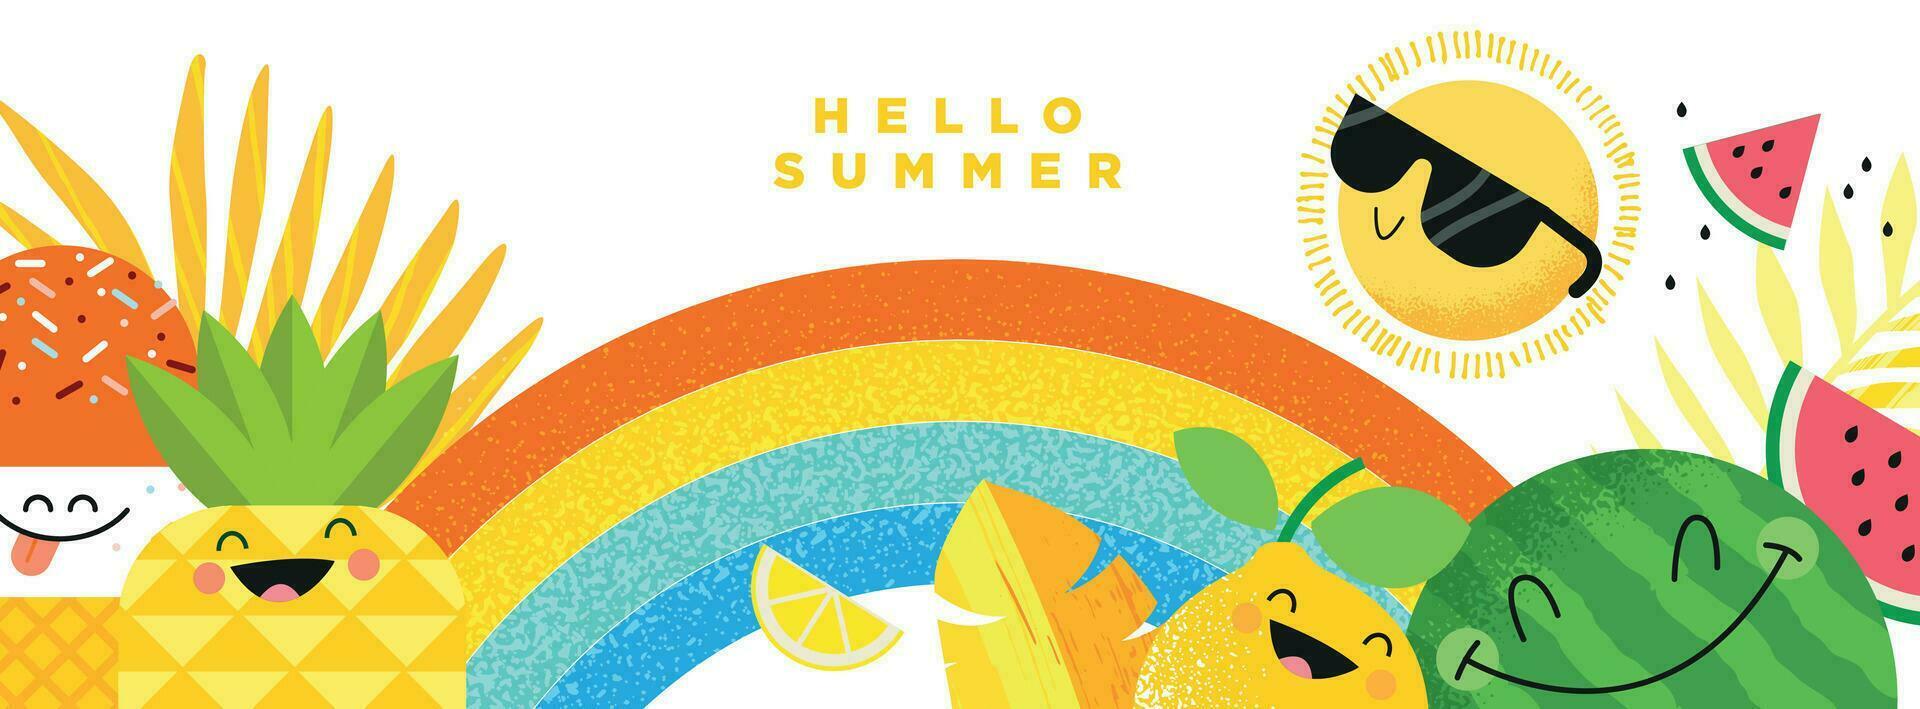 Hello Summer. Vector illustration concept for website design, background, social media banner, travel and holiday ads, sale promotion, poster, marketing material, summer card, party invitation.